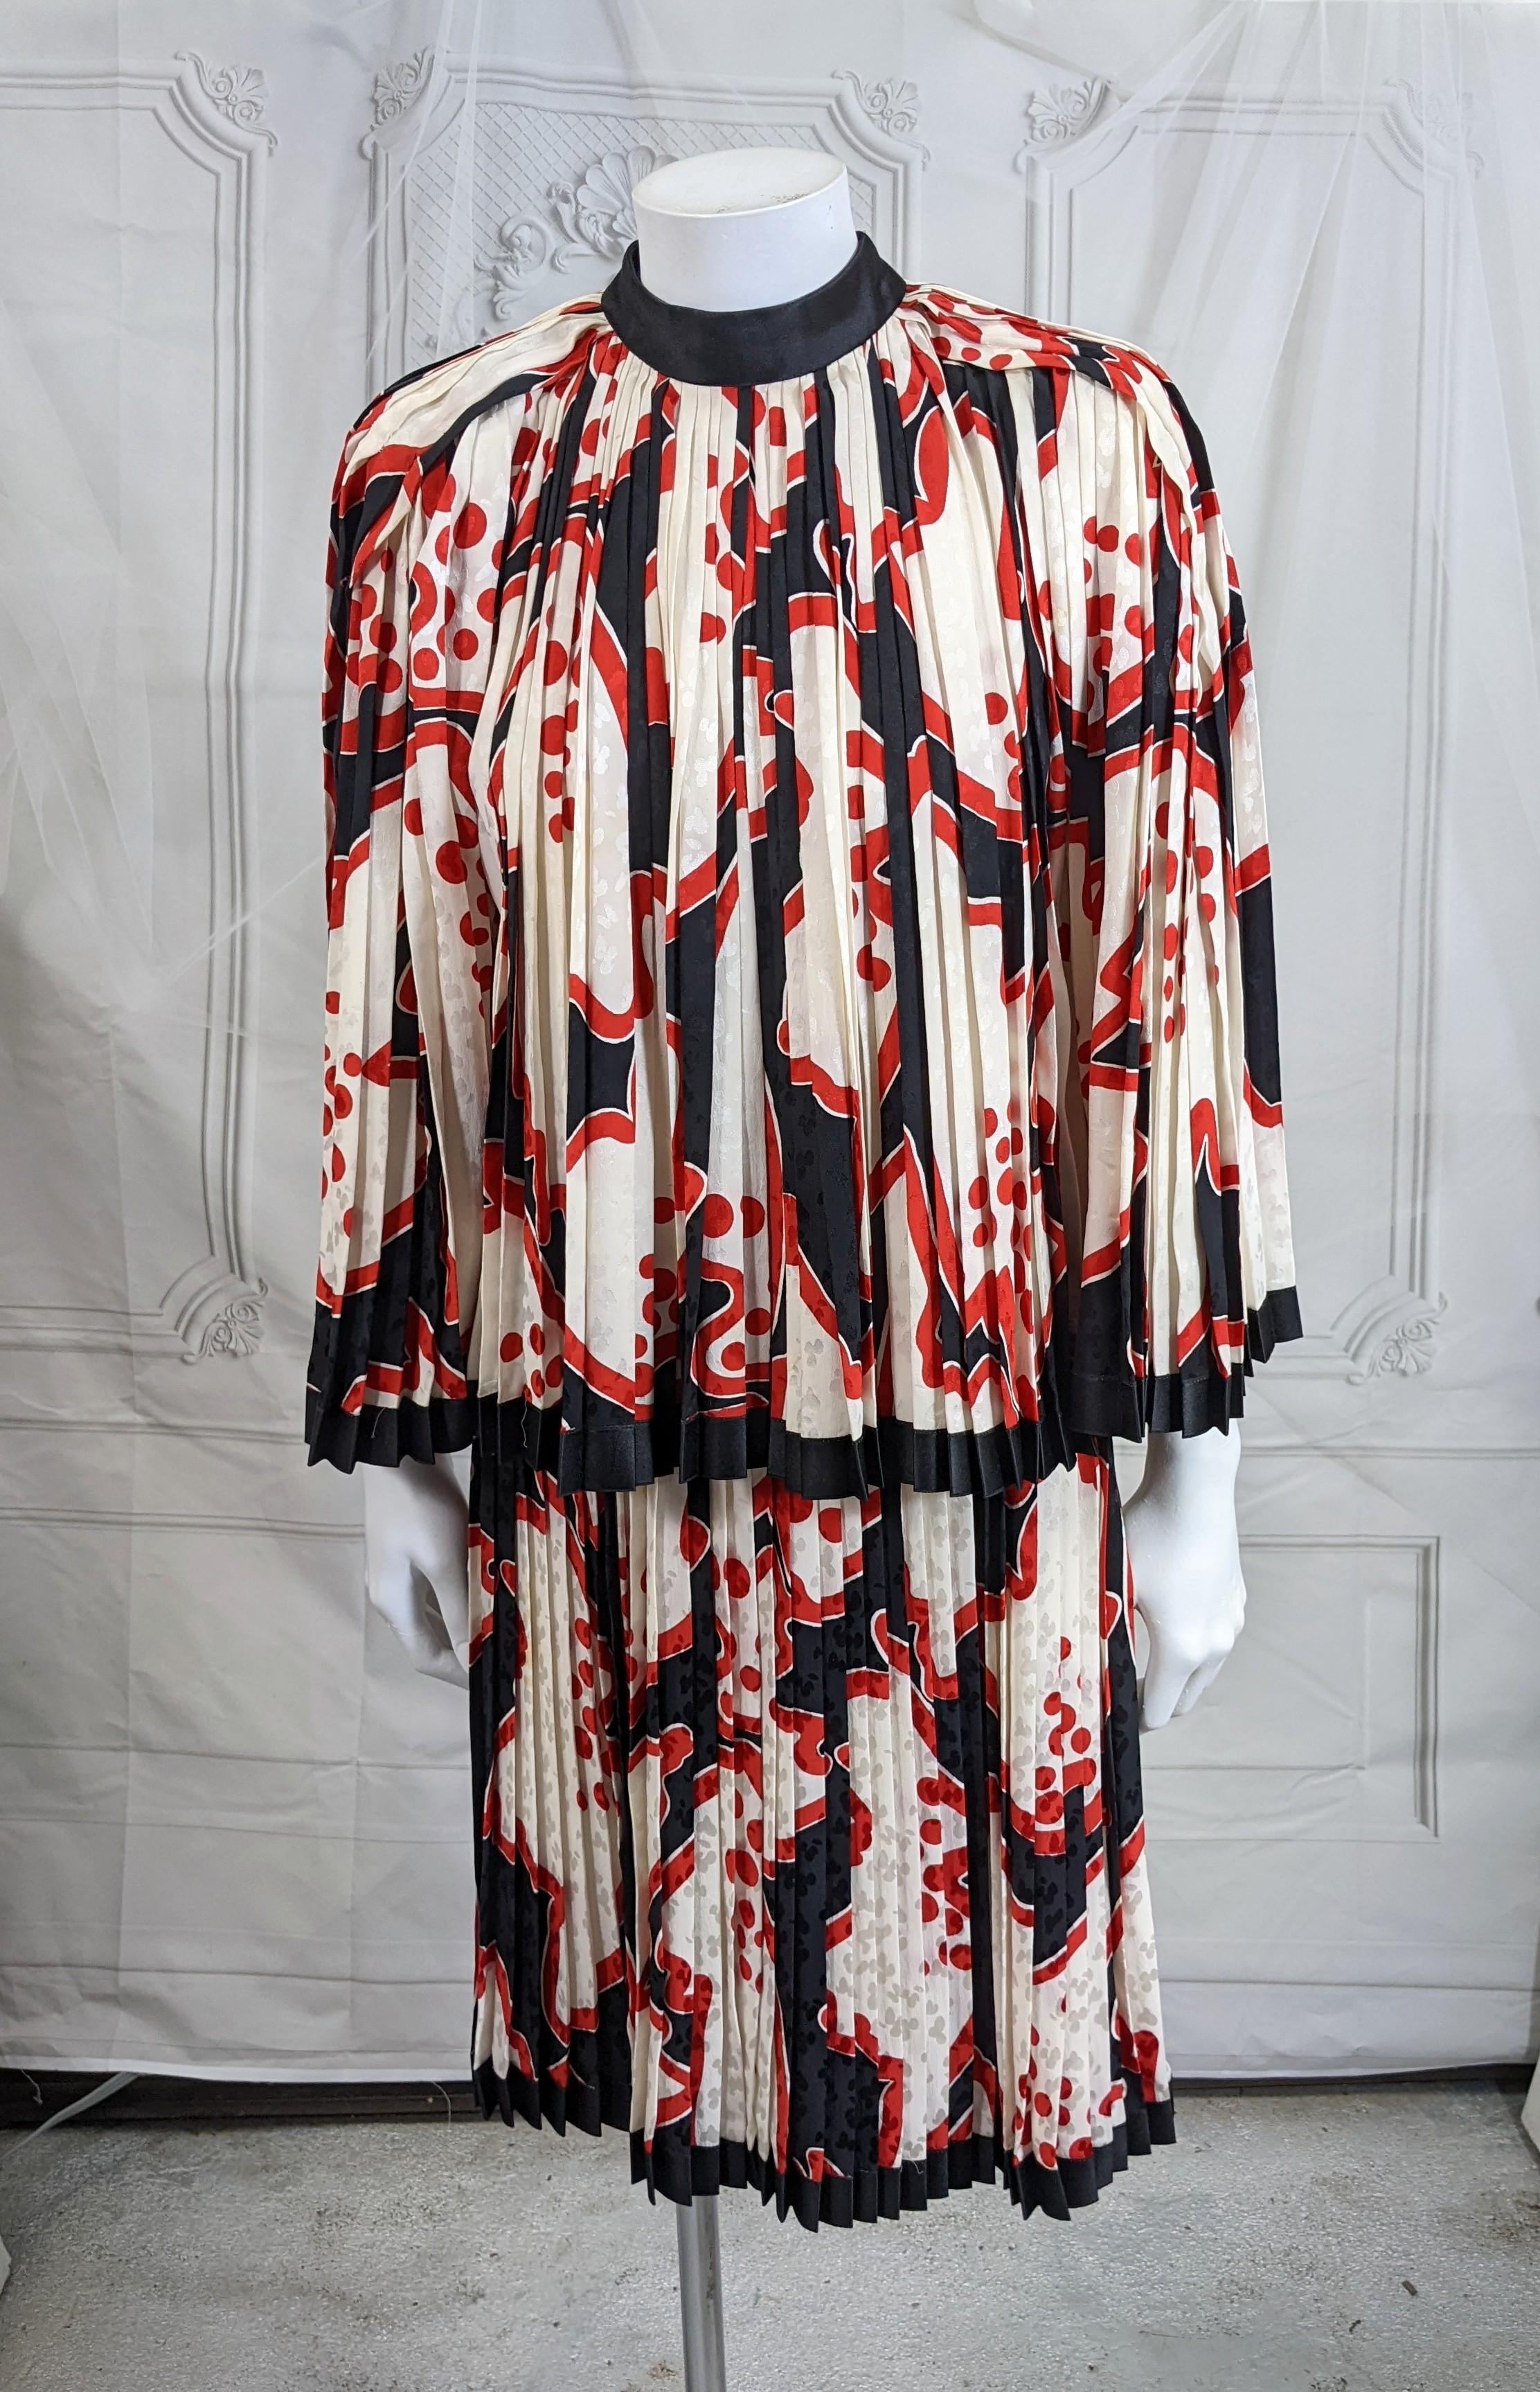 Elegant Galanos Silk Crepe 2 piece pleated dress. Unusual design from Galanos. The printed black/red silk crepe is pleated from the waist and neckline and edged in black satin ribbon. James Galanos's garments are beautifully constructed inside and